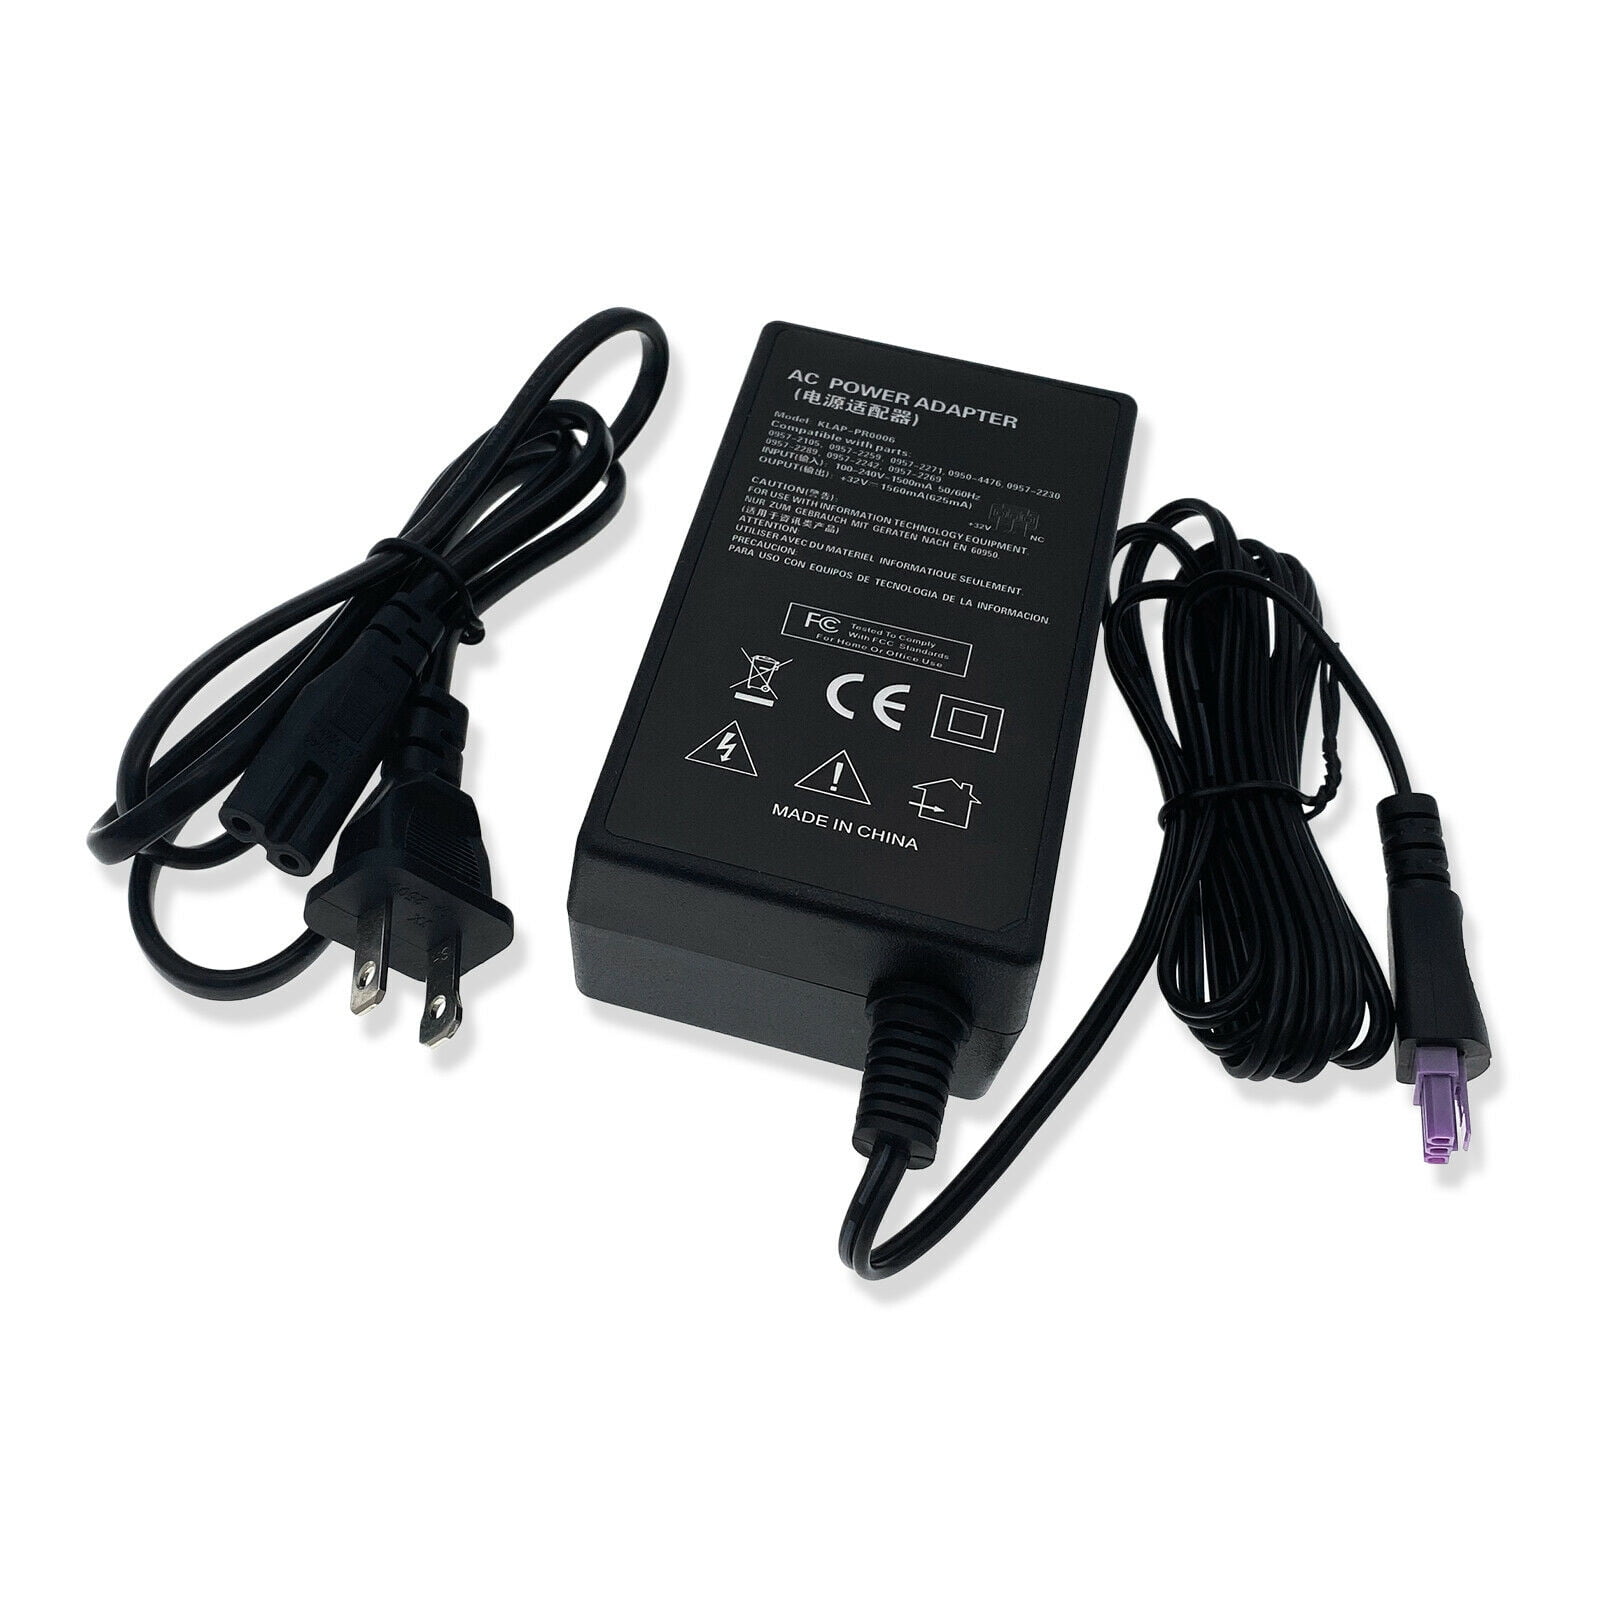 hp photosmart c6280 all in one power cord